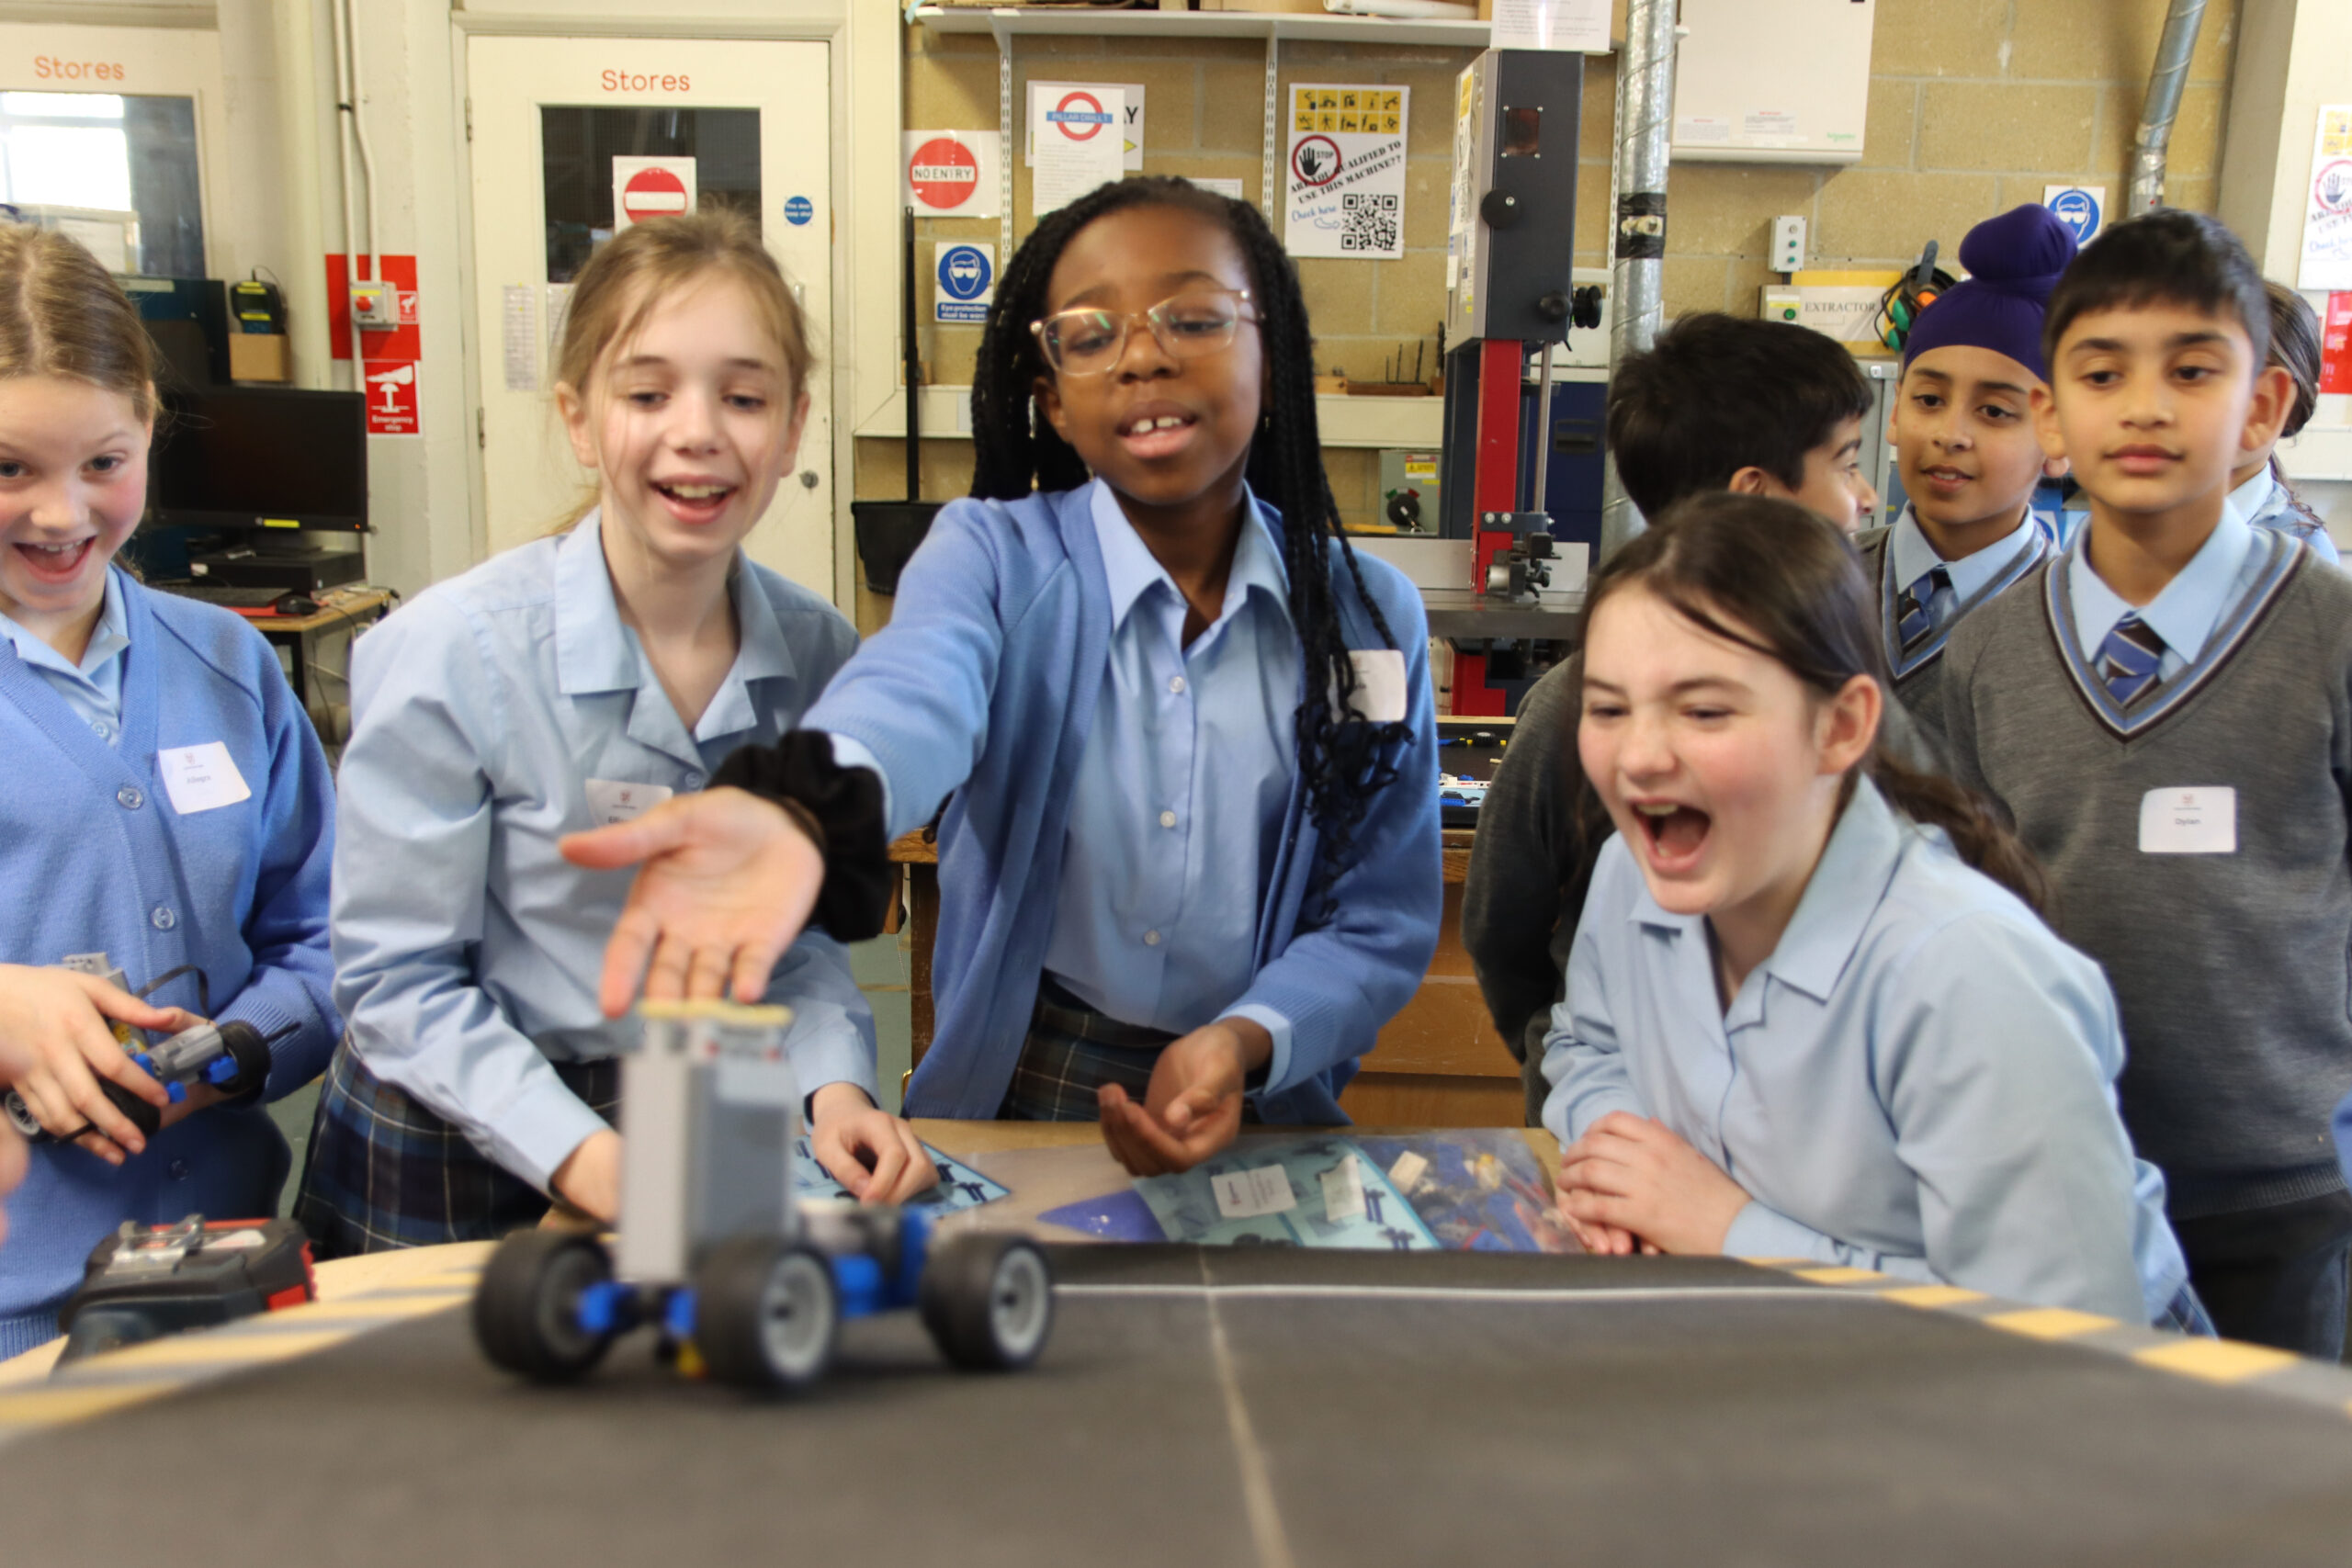 Year 5s from Eton End School visit Leighton Park for a DT and Engineering workshop